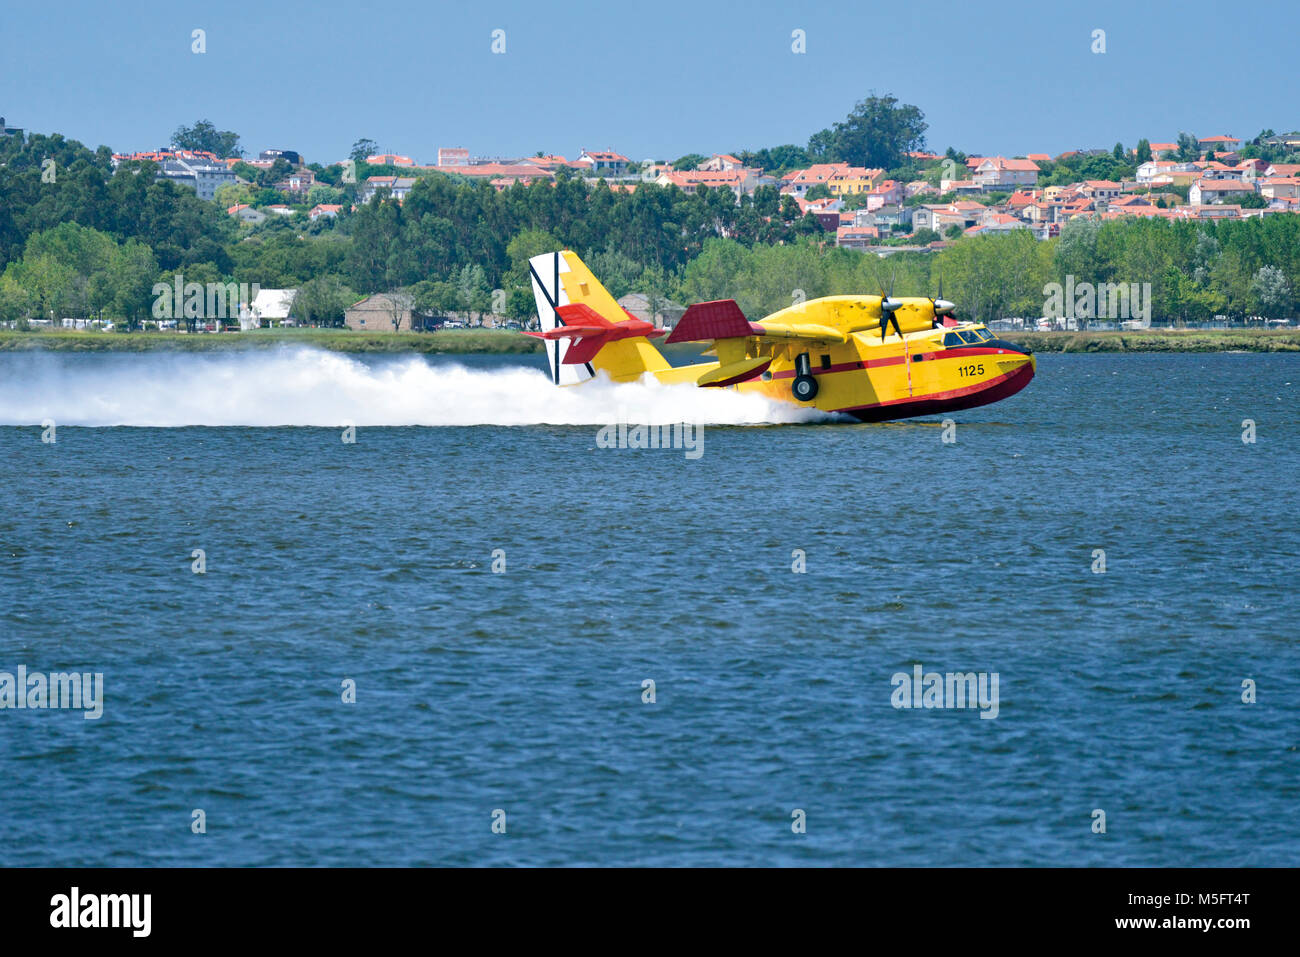 Fire-fighting plane catching water in a barrage Stock Photo